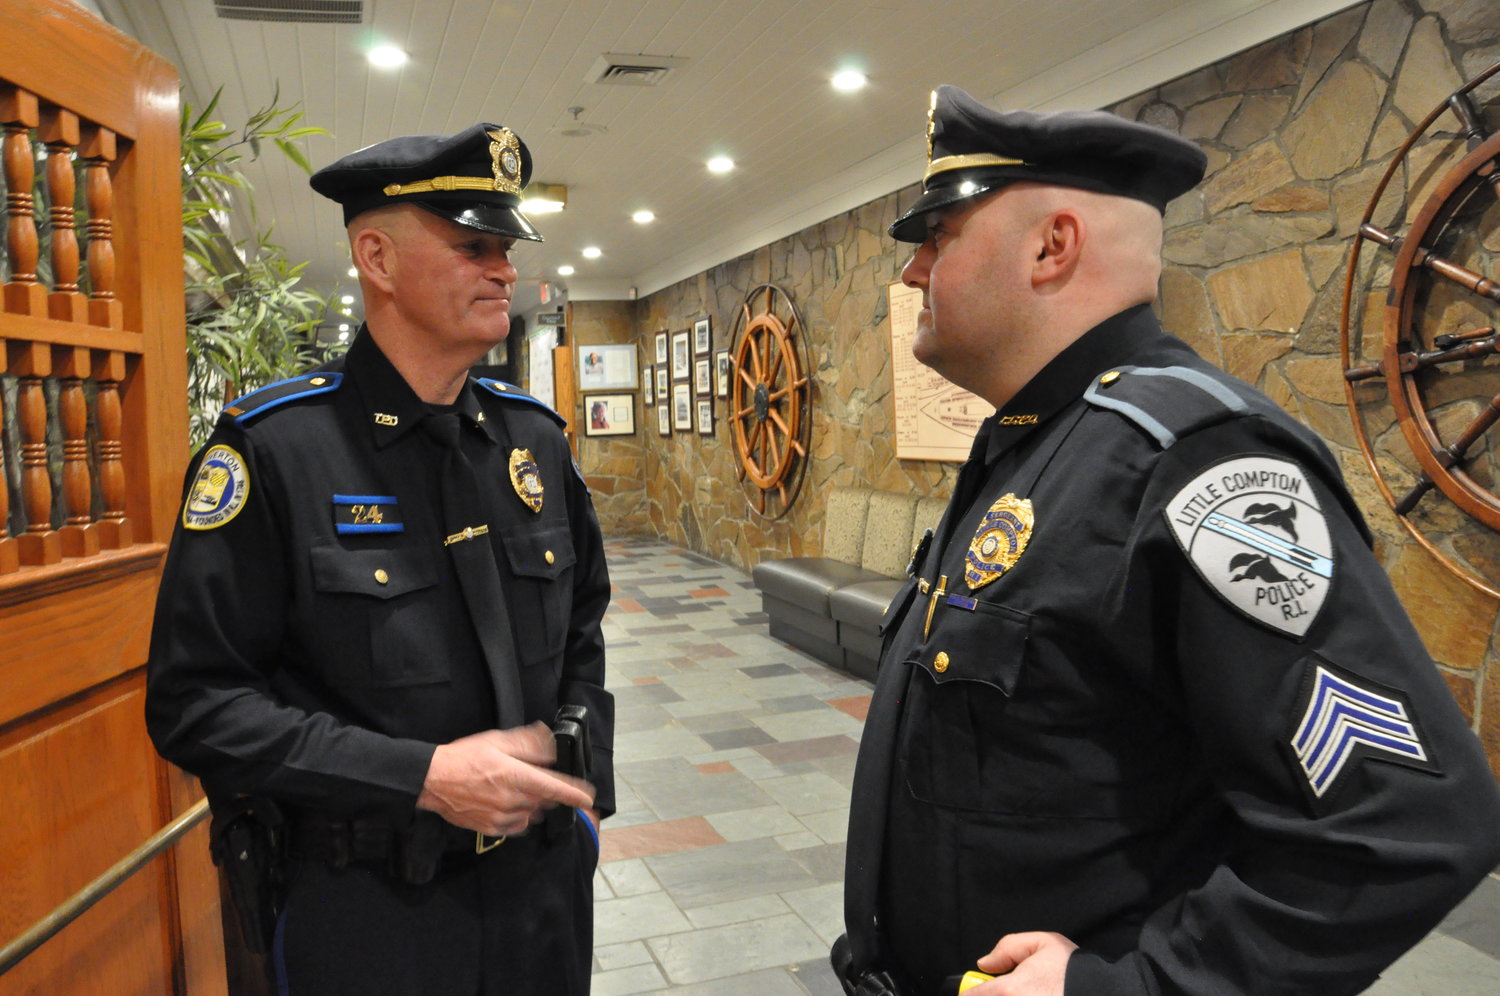 Tiverton Police Lt. Christopher Dyson (left) talks with Little Compton Police Sgt. Ryan LeClaire prior to the awards ceremony.